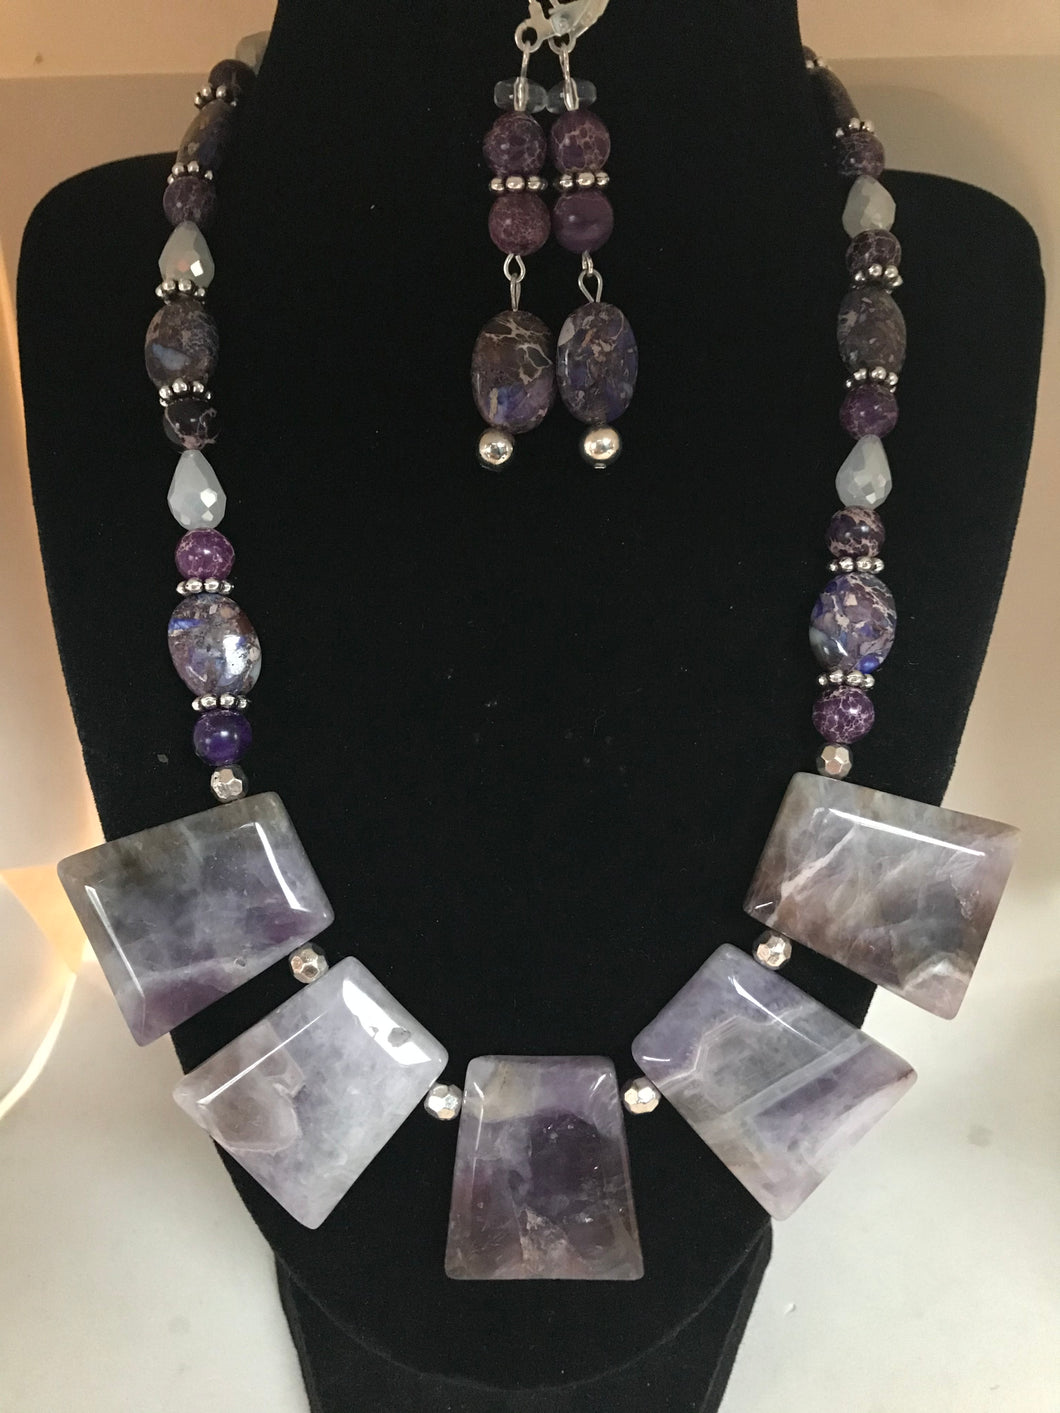 Amethyst semi-precious stones necklace and earring set